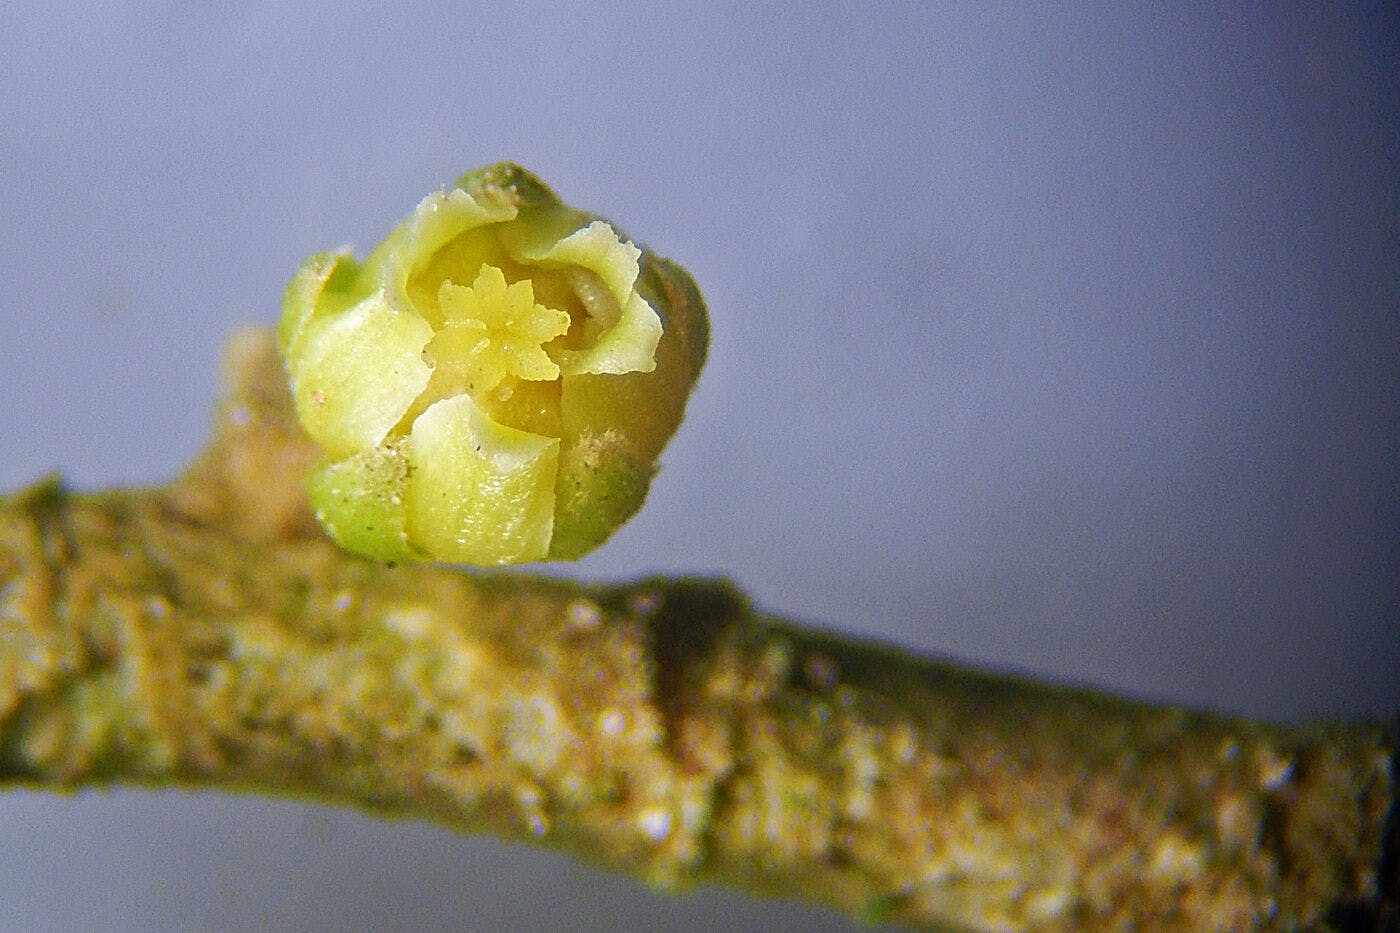 A small yellow bud on a branch.